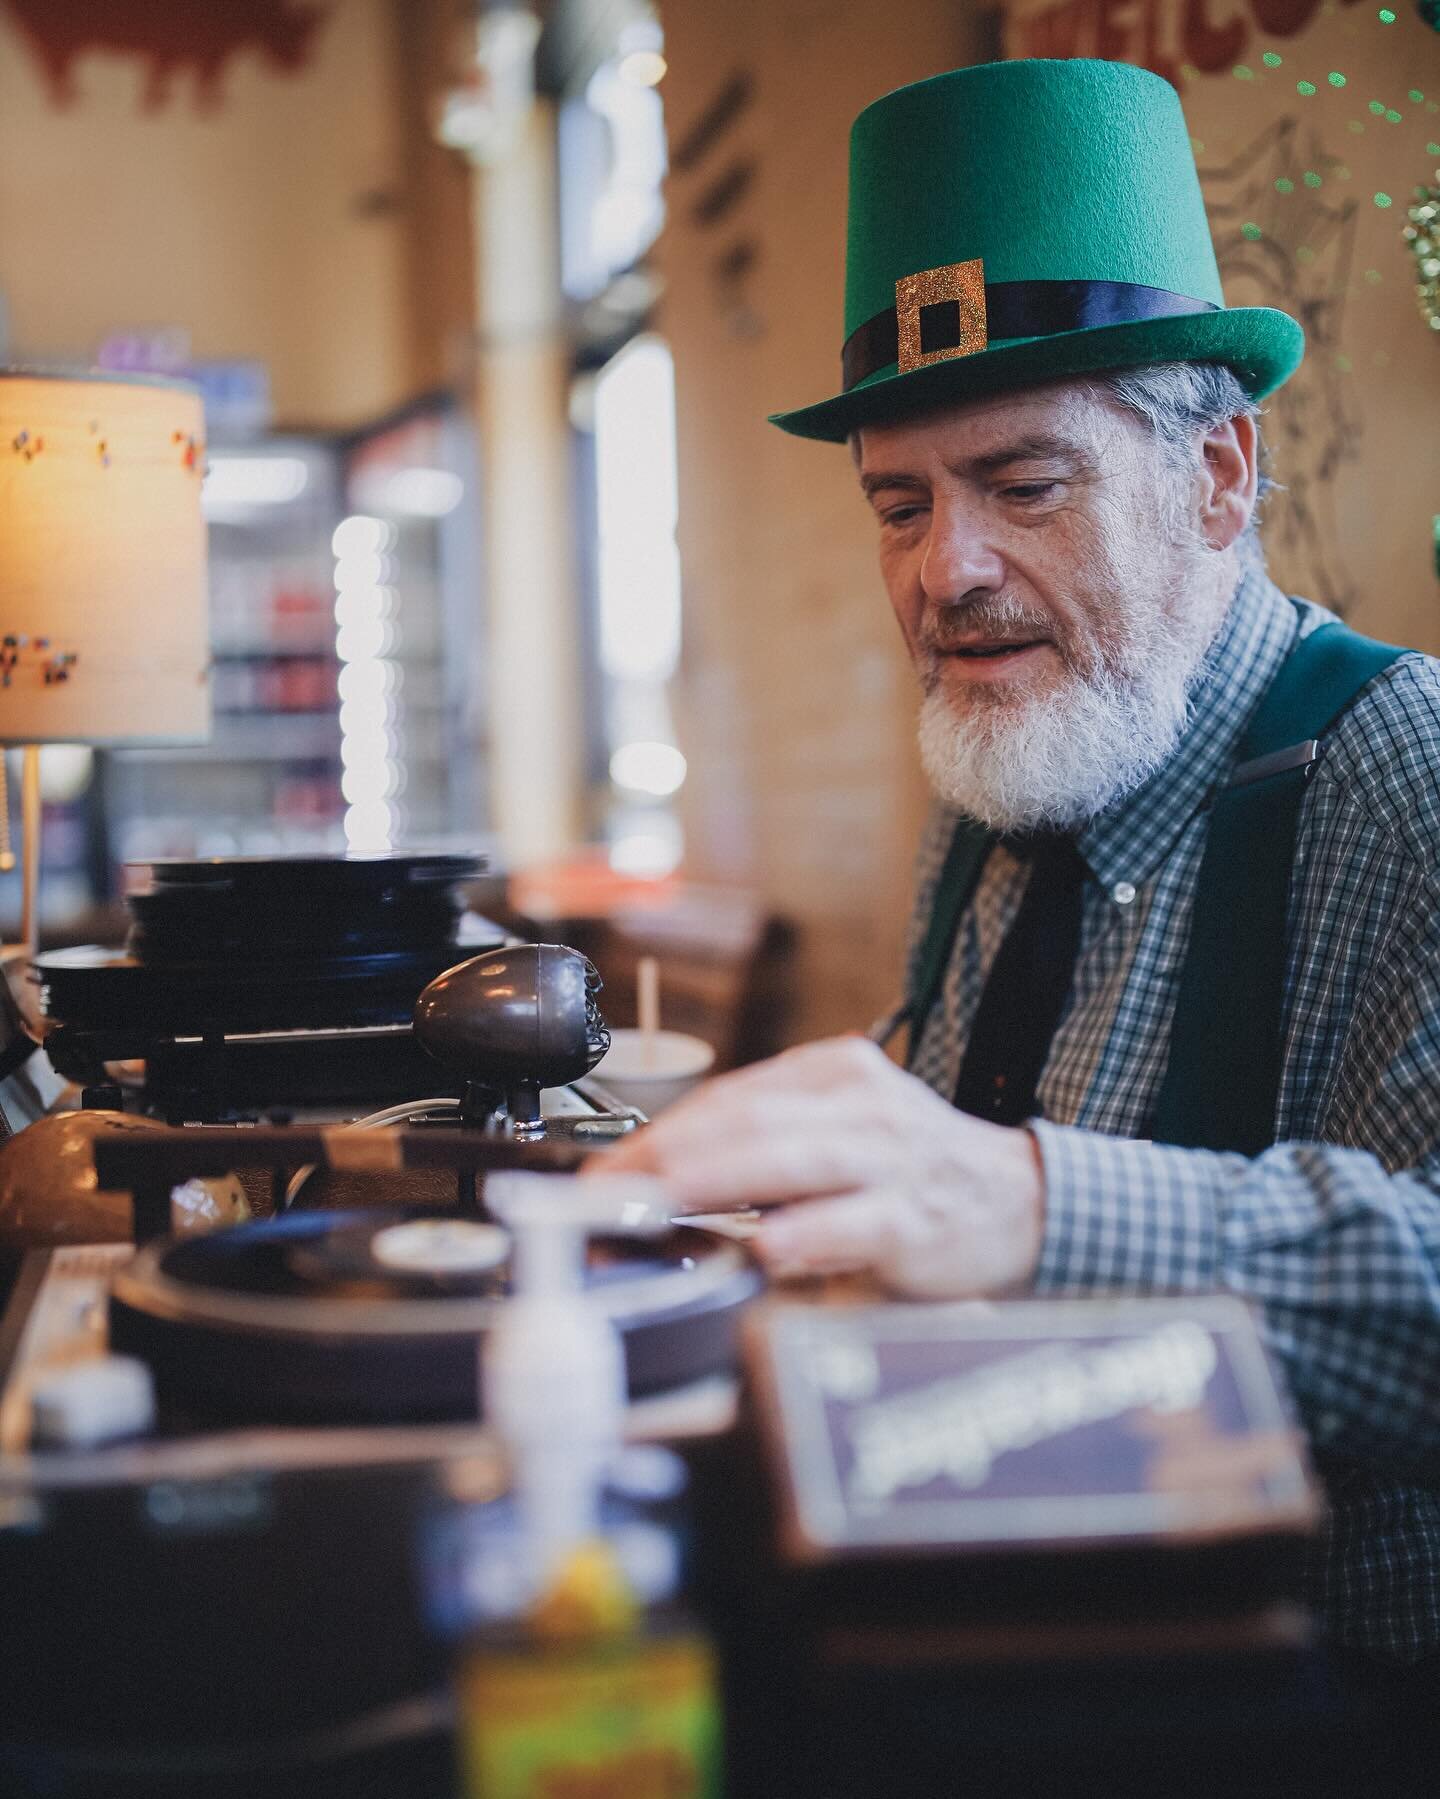 Yesterday I got a sandwich with @chrisashworthh and ended up talking to the DJ that was spinning 100yr old records at Rhino Market. Dirk Allman, aka DJ Nostalgia, is frequently at Rhino Market spinning records and does all sorts of events around the 